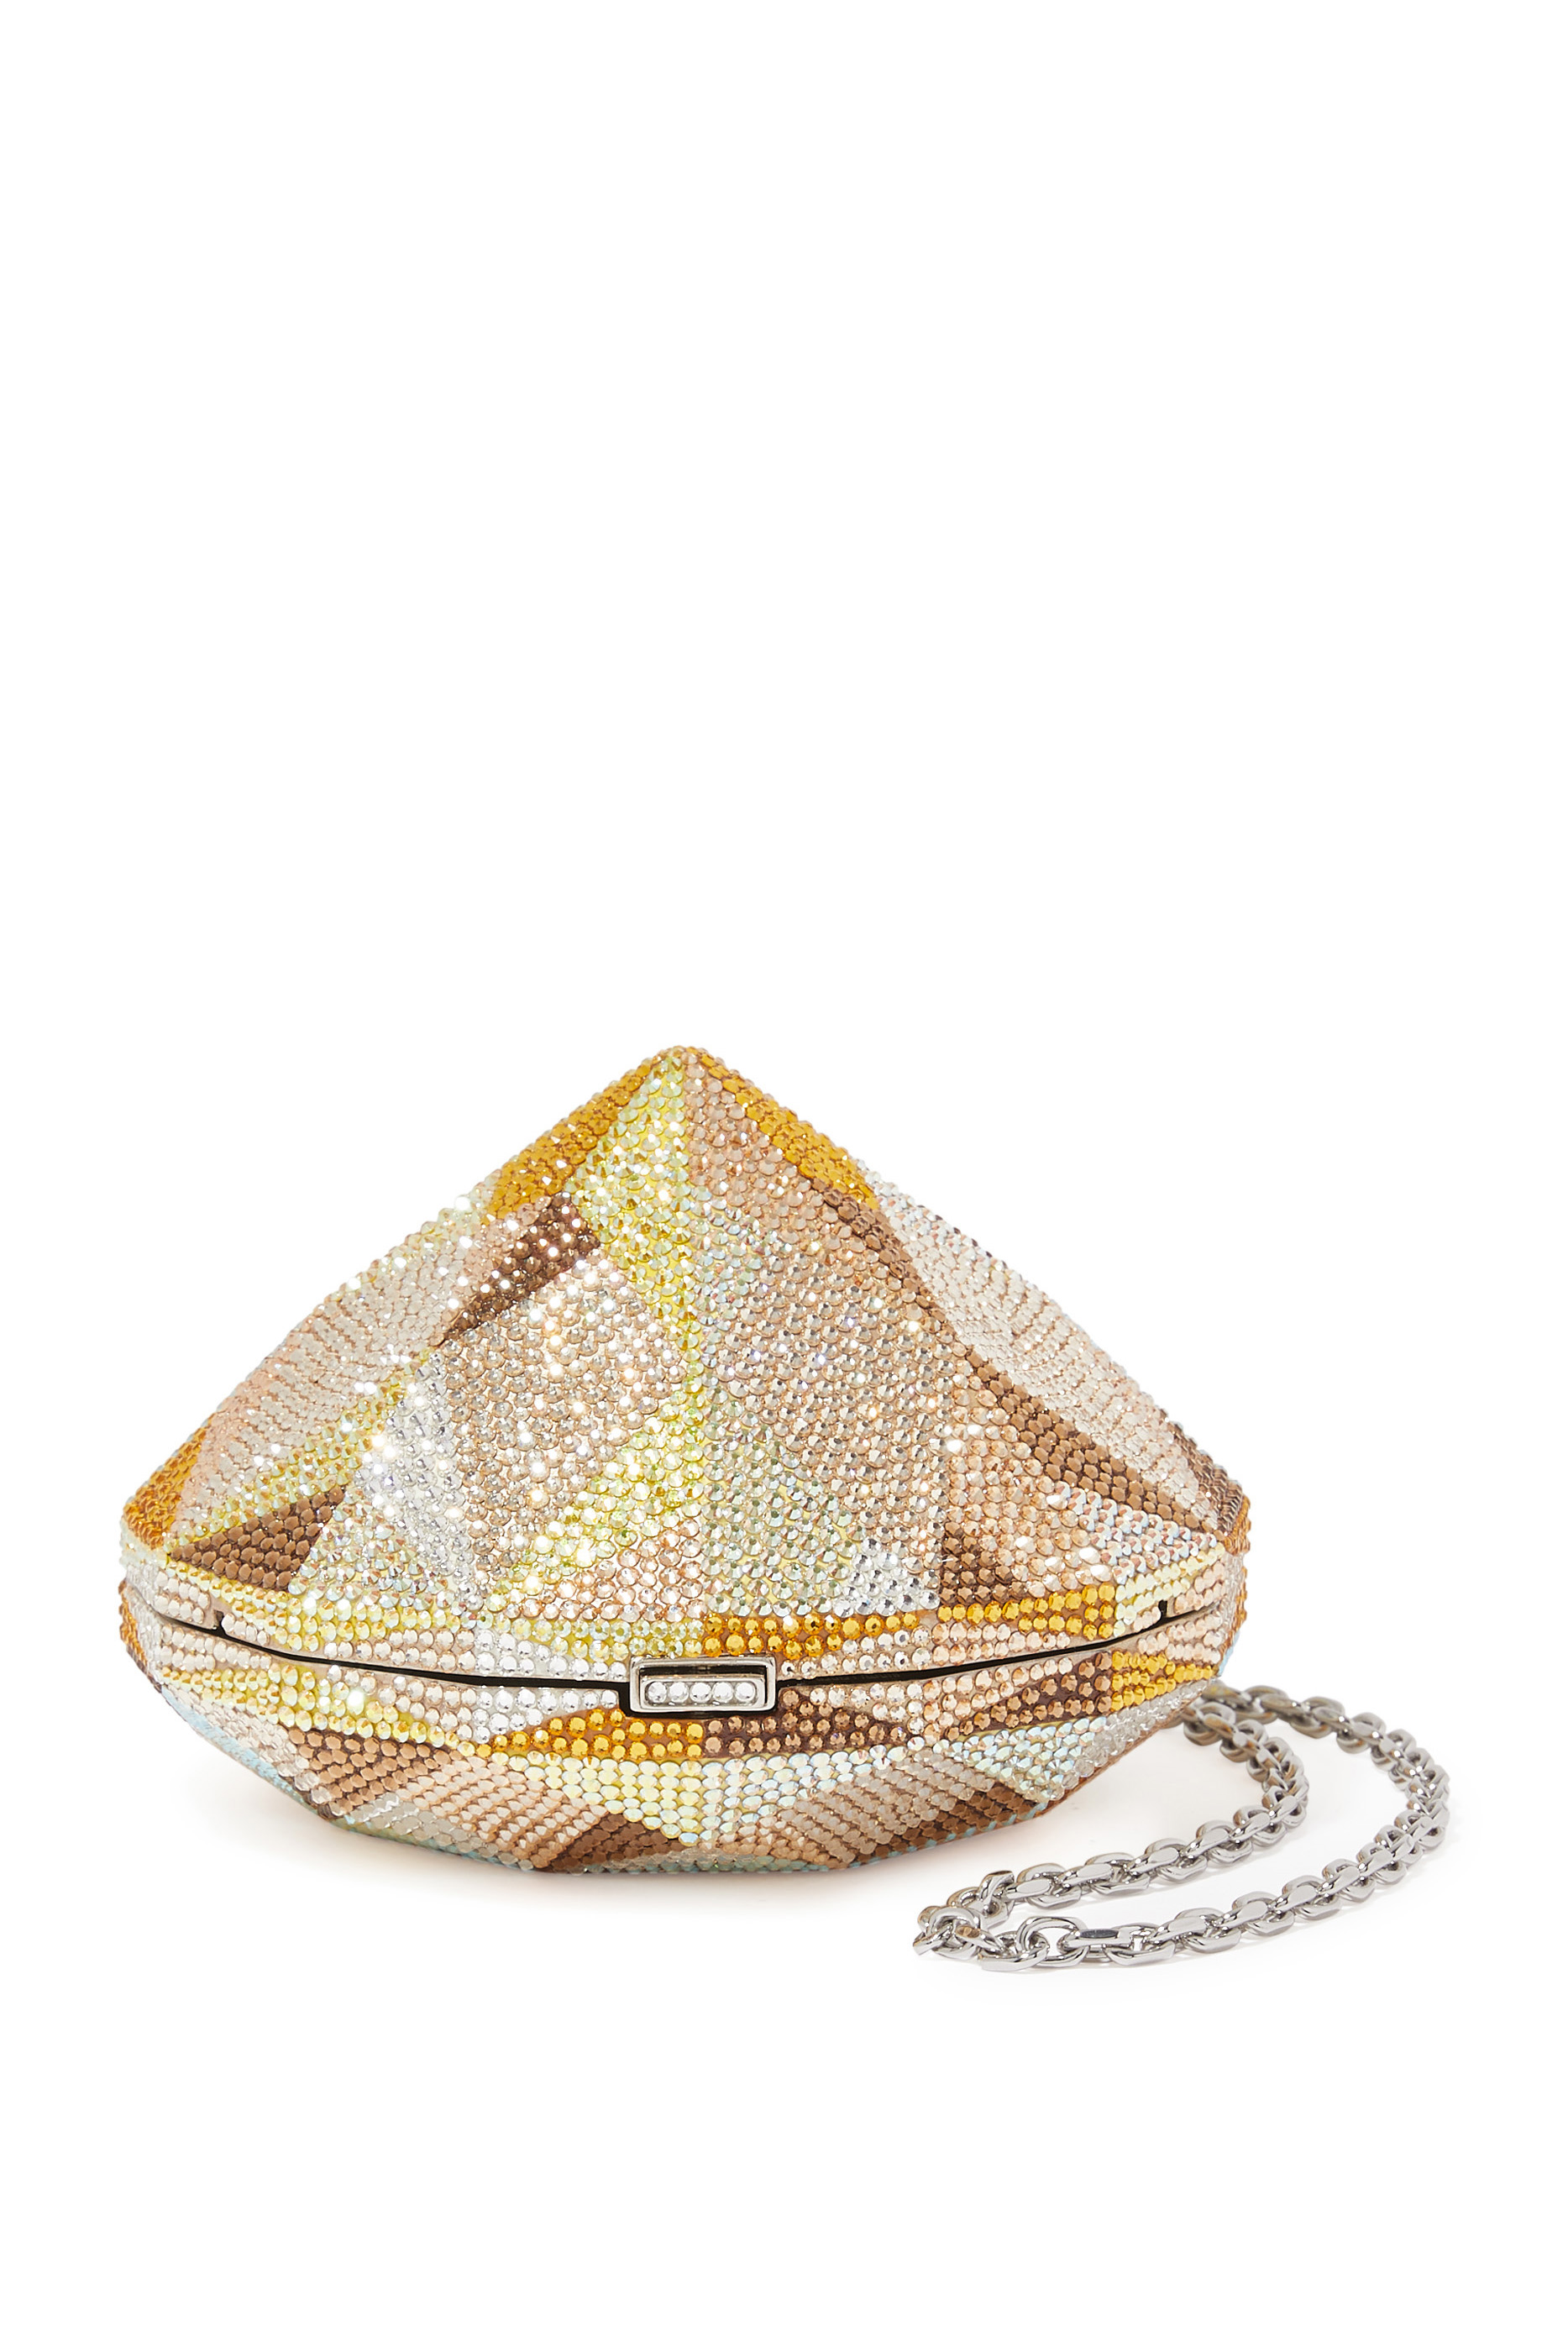 Judith Leiber Couture Diamond Flawless Crystal Clutch